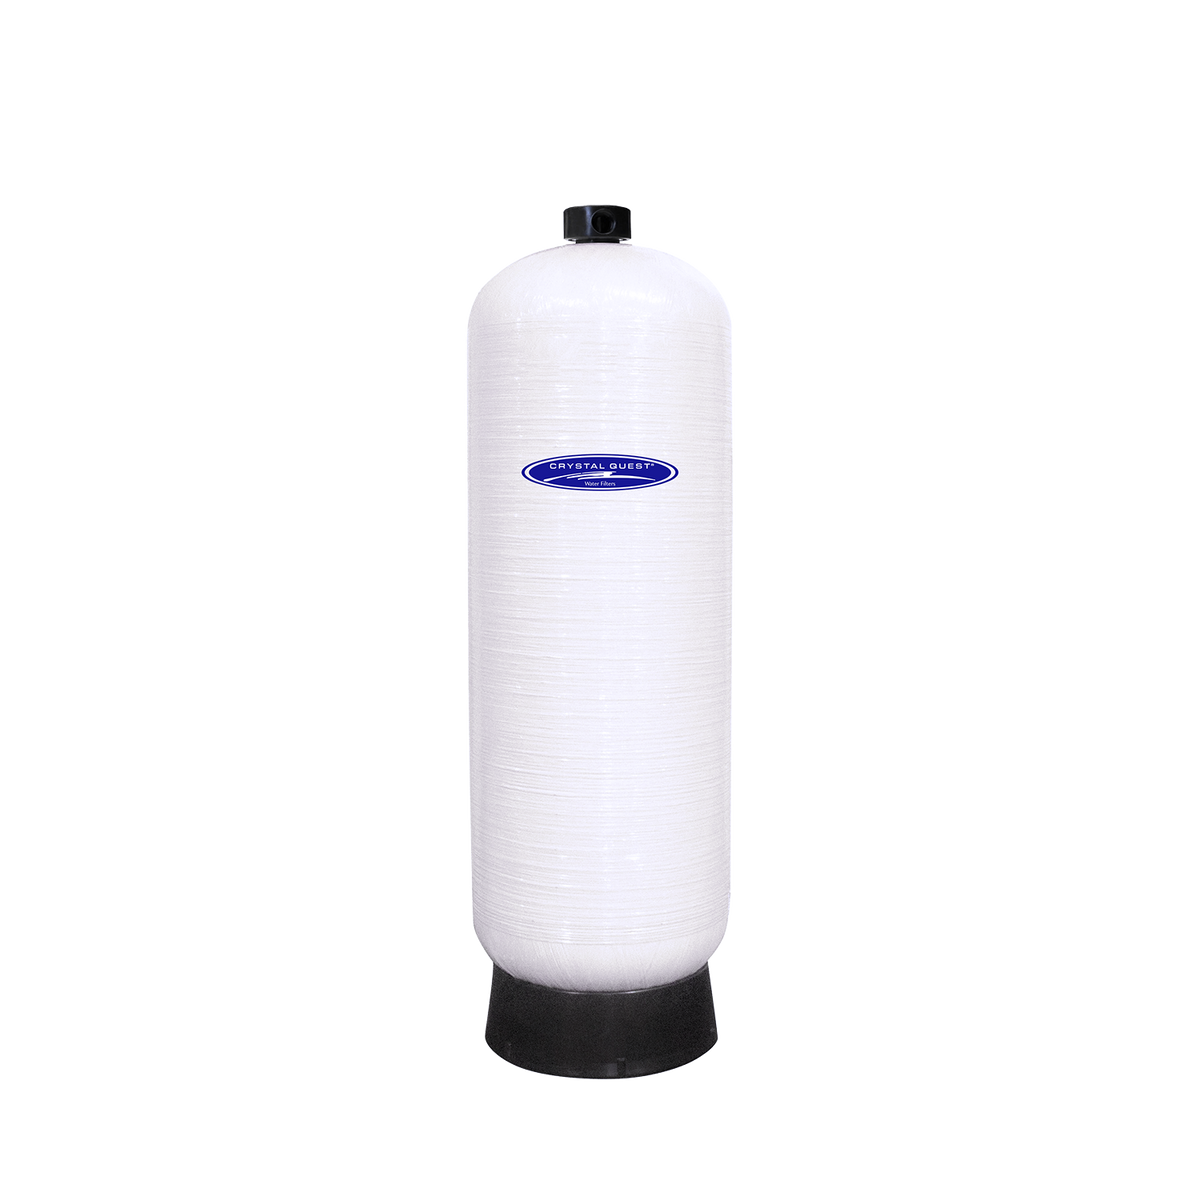 35 GPM / Manual (Upflow) Granular Activated Carbon Water Filtration System - Commercial - Crystal Quest